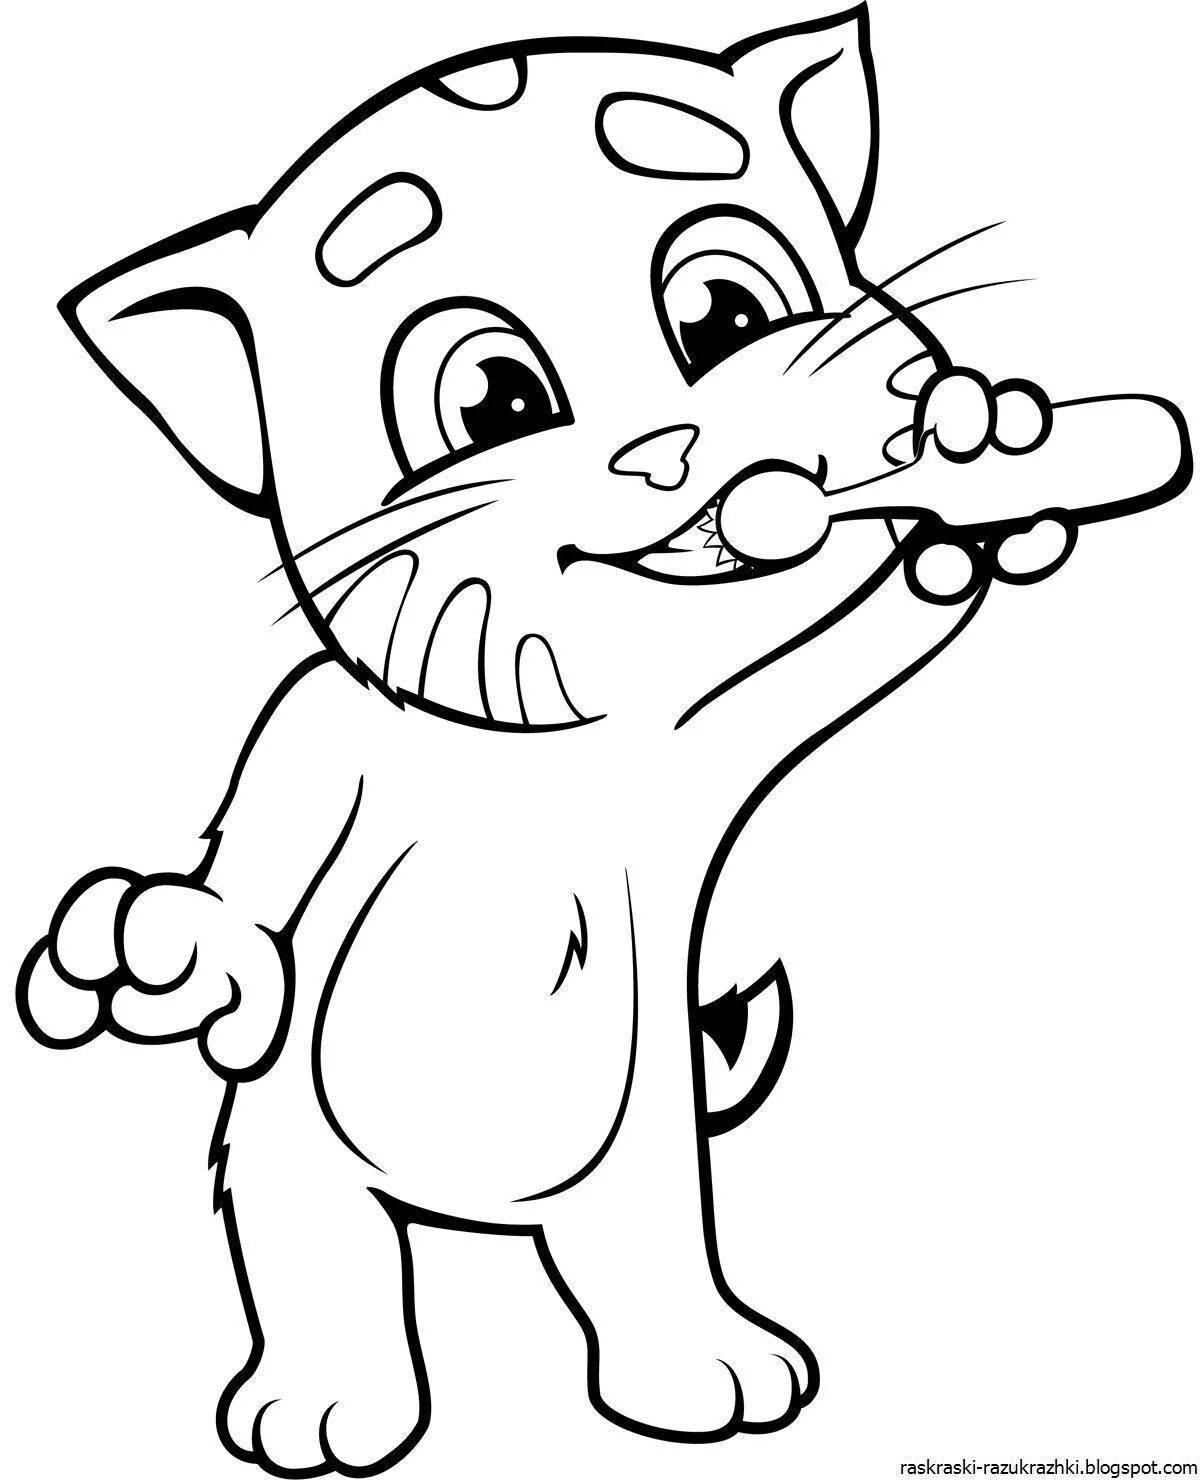 Kitty's wonderful coloring book for 5-6 year olds